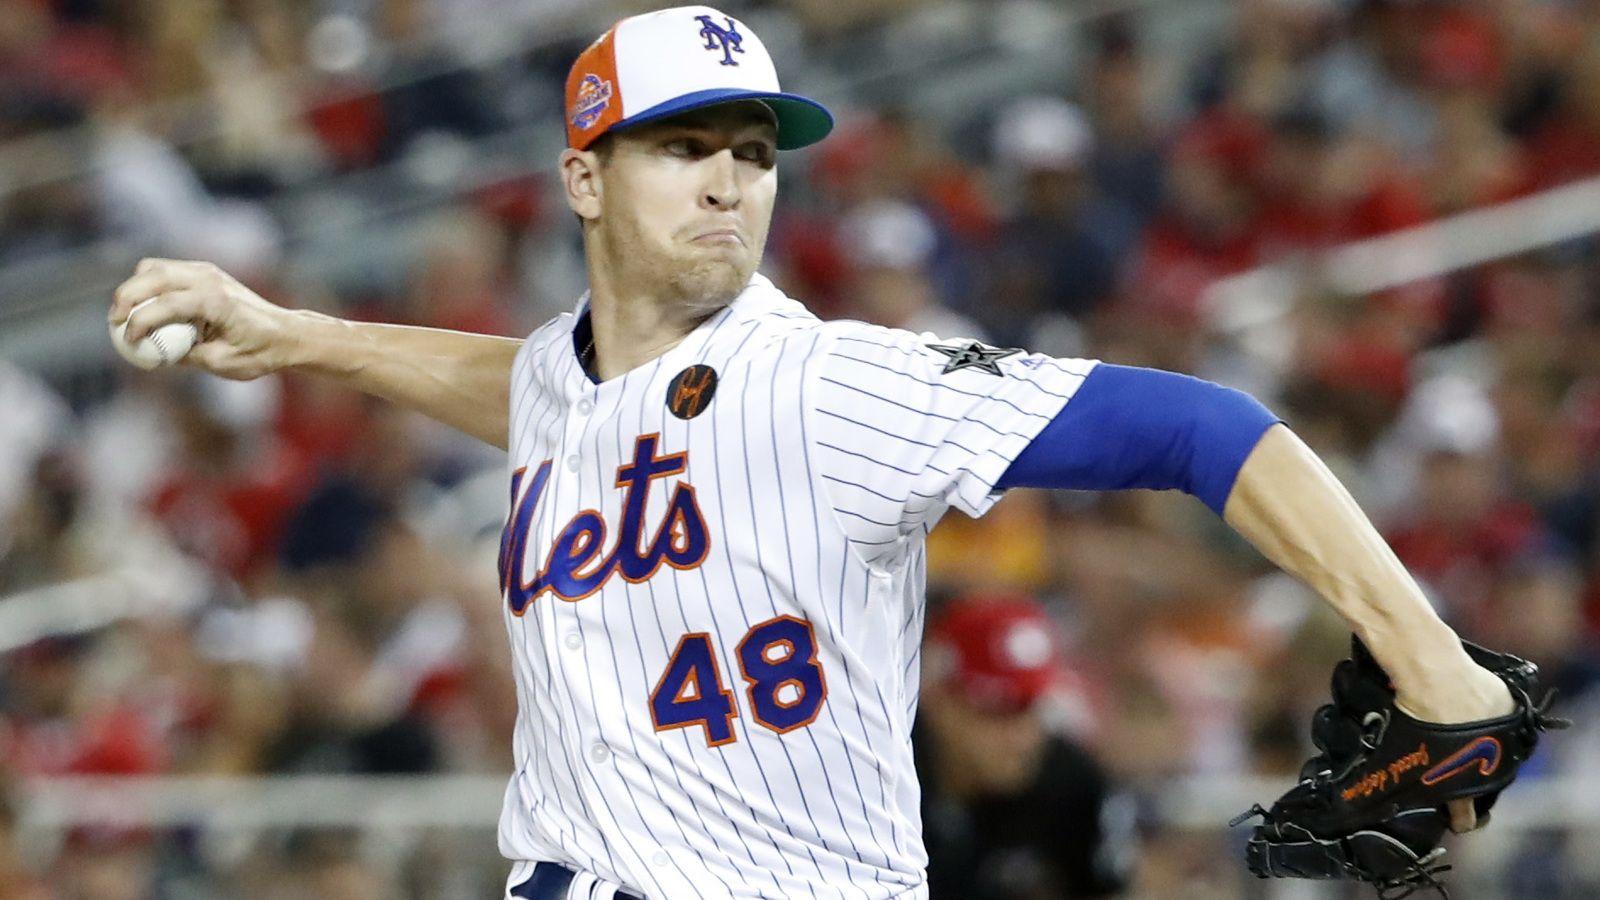 Report: Mets unlikely to trade deGrom, Syndergaard Sports News